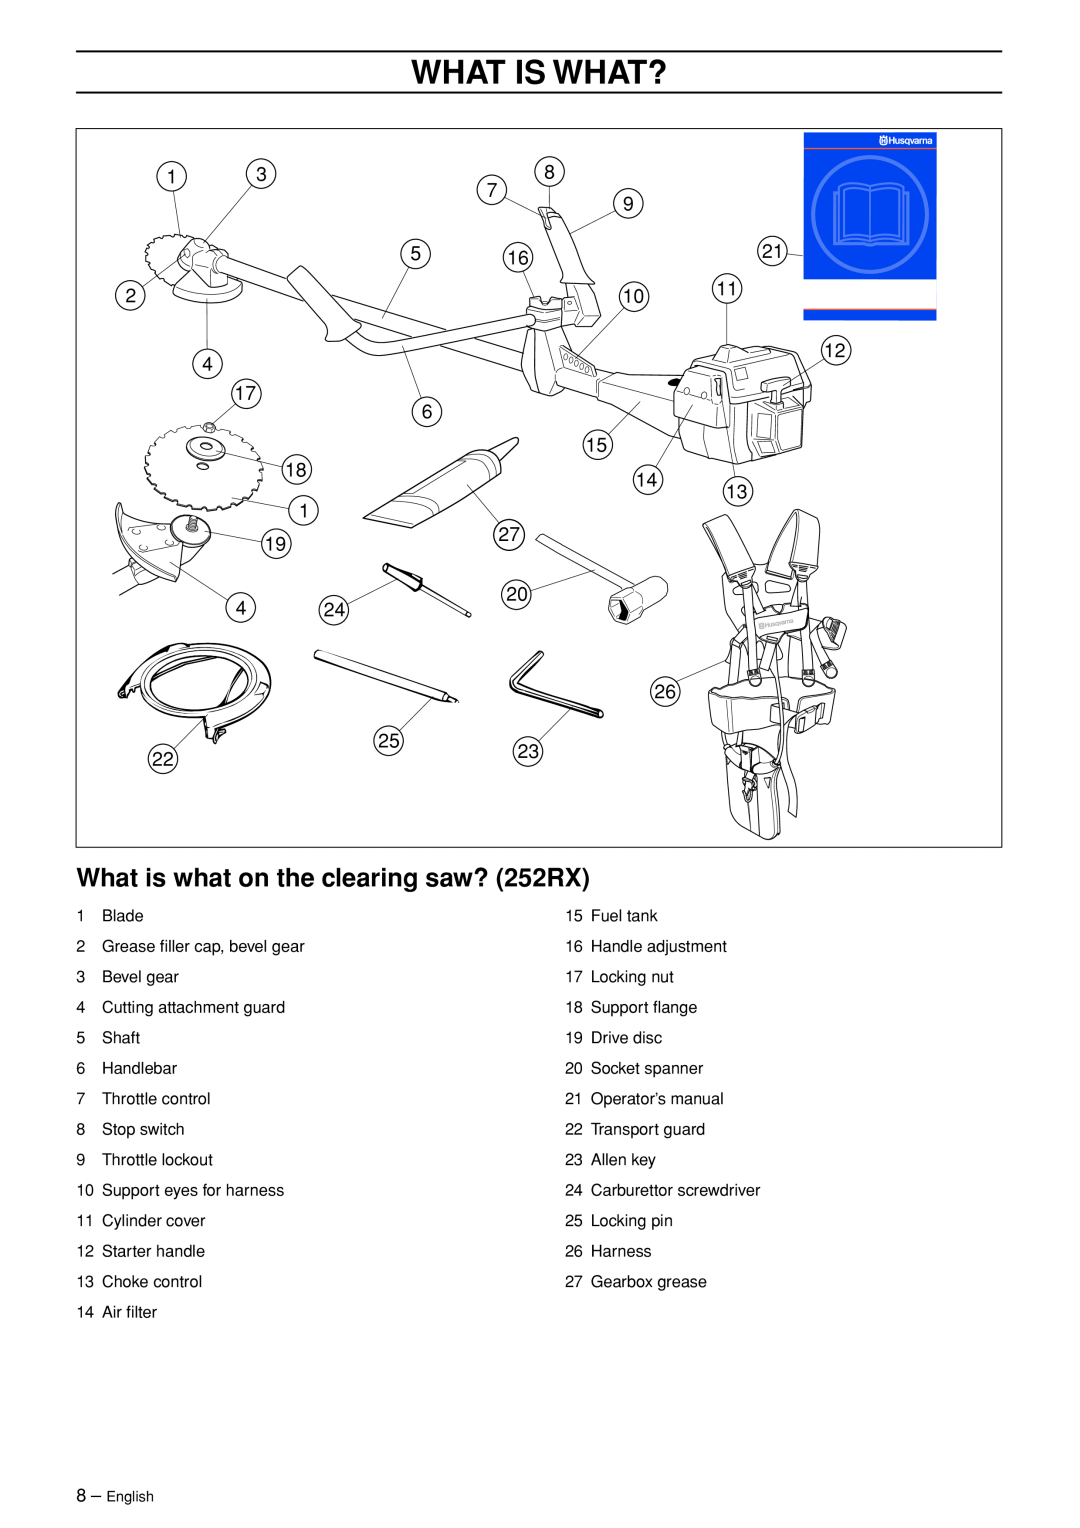 Husqvarna 250 R manual What is what on the clearing saw? 252RX, What Is What? 